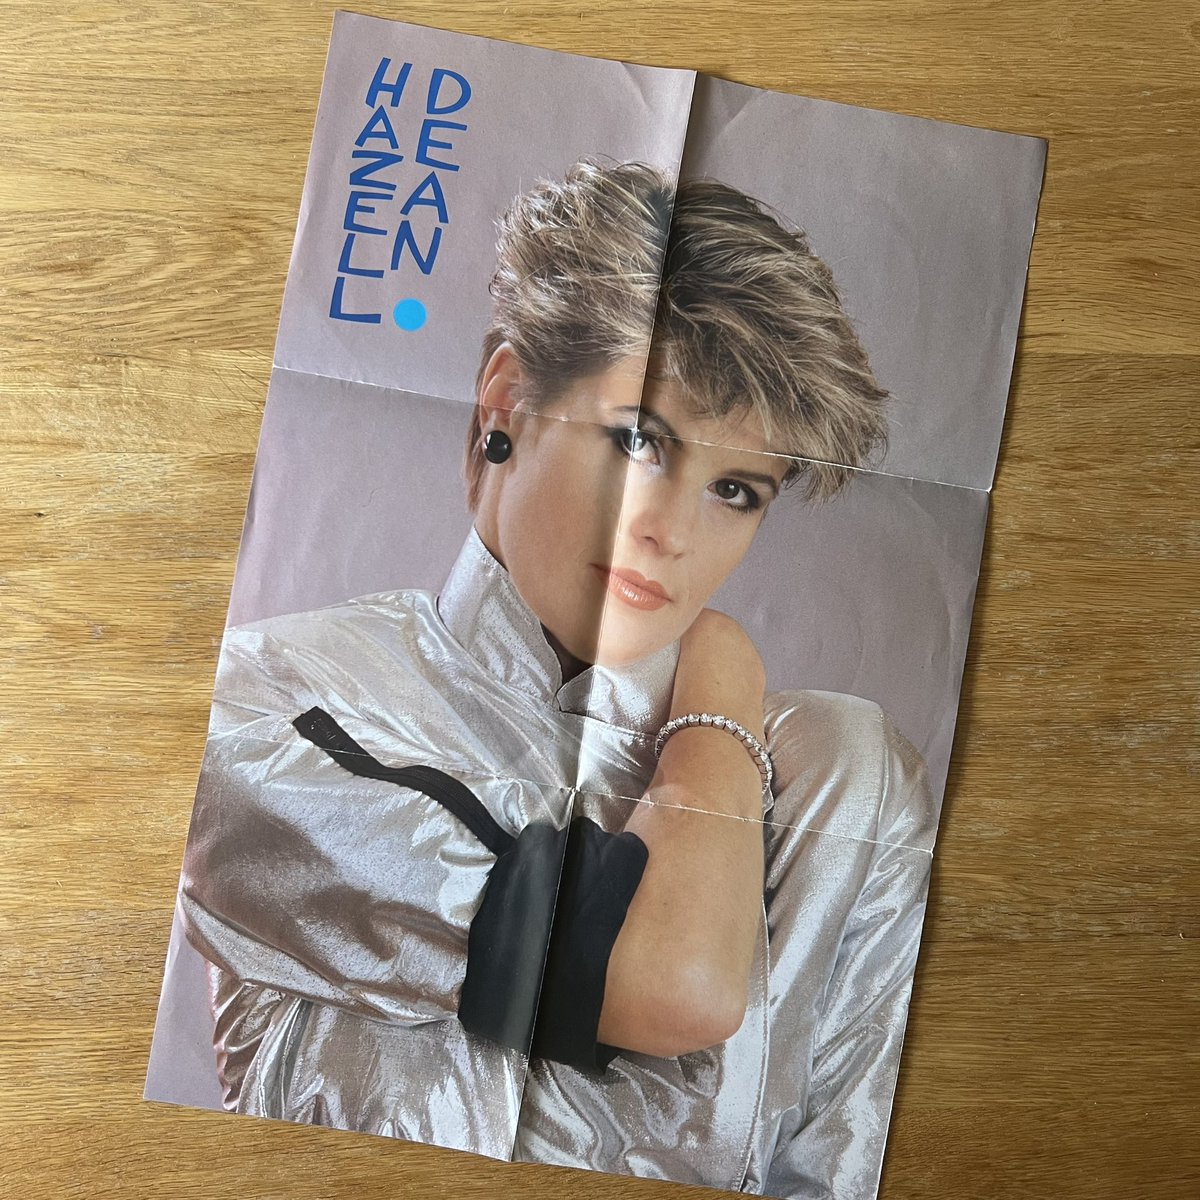 @PWLHitFactory @PeteWatermanOBE @mikestockmusic @matt_aitken25 @HazellHD #StockAitkenWaterman single No 11 was “No Fool (for Love)”, by Hazell Dean, 41 in the UK in March 85. Here are the UK 12”, standard, poster bag and picture disc 7” editions, and the German single “Harmony”, which included “No Fool” as its b-side. #PWLCollection #PWL40 #PWL